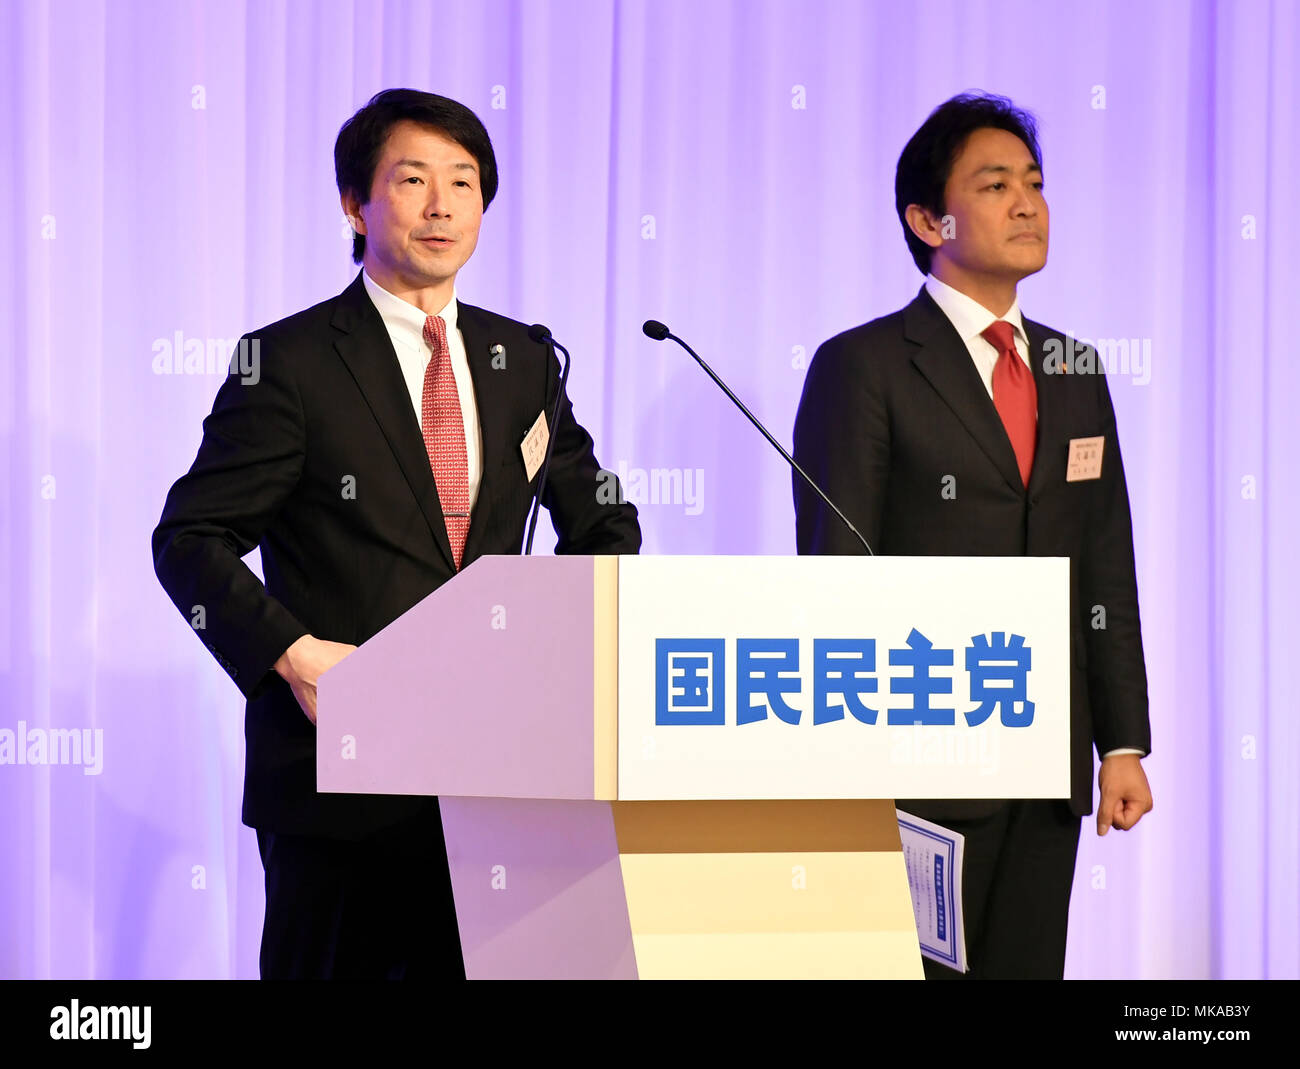 Tokyo, Japan. 7th May, 2018. Kohei Otsuka (L), an upper house lawmaker who led the Democratic Party, speaks during the new party's inauguration ceremony in Tokyo, Japan, May 7, 2018. The now-obsolete opposition Democratic Party of Japan and the Party of Hope joined forces again Monday under the new single party name Democratic Party for the People. Credit: Ma Ping/Xinhua/Alamy Live News Stock Photo